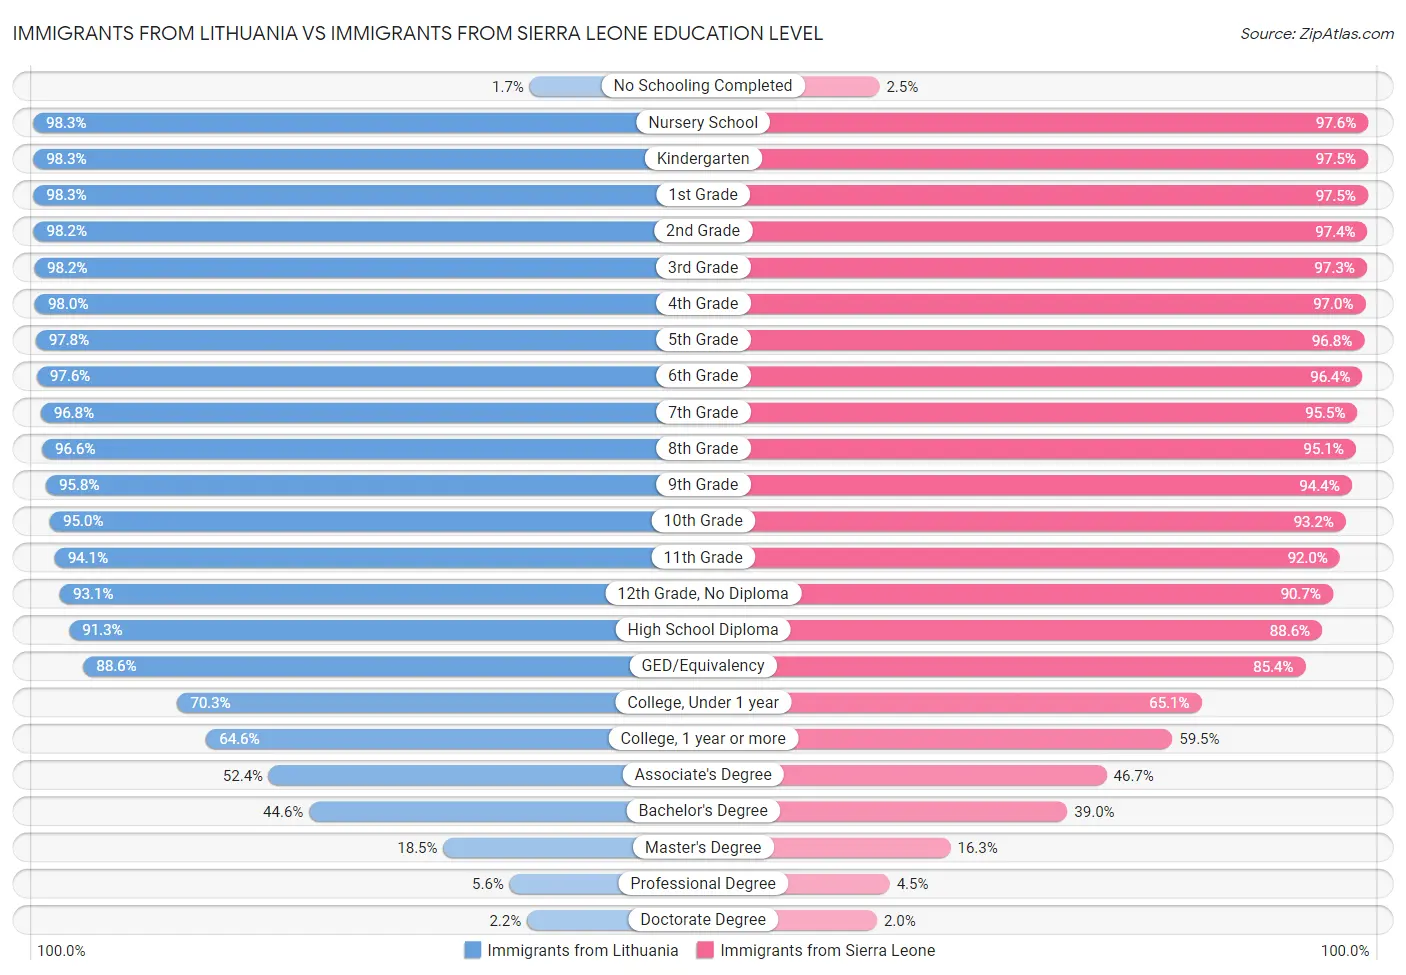 Immigrants from Lithuania vs Immigrants from Sierra Leone Education Level